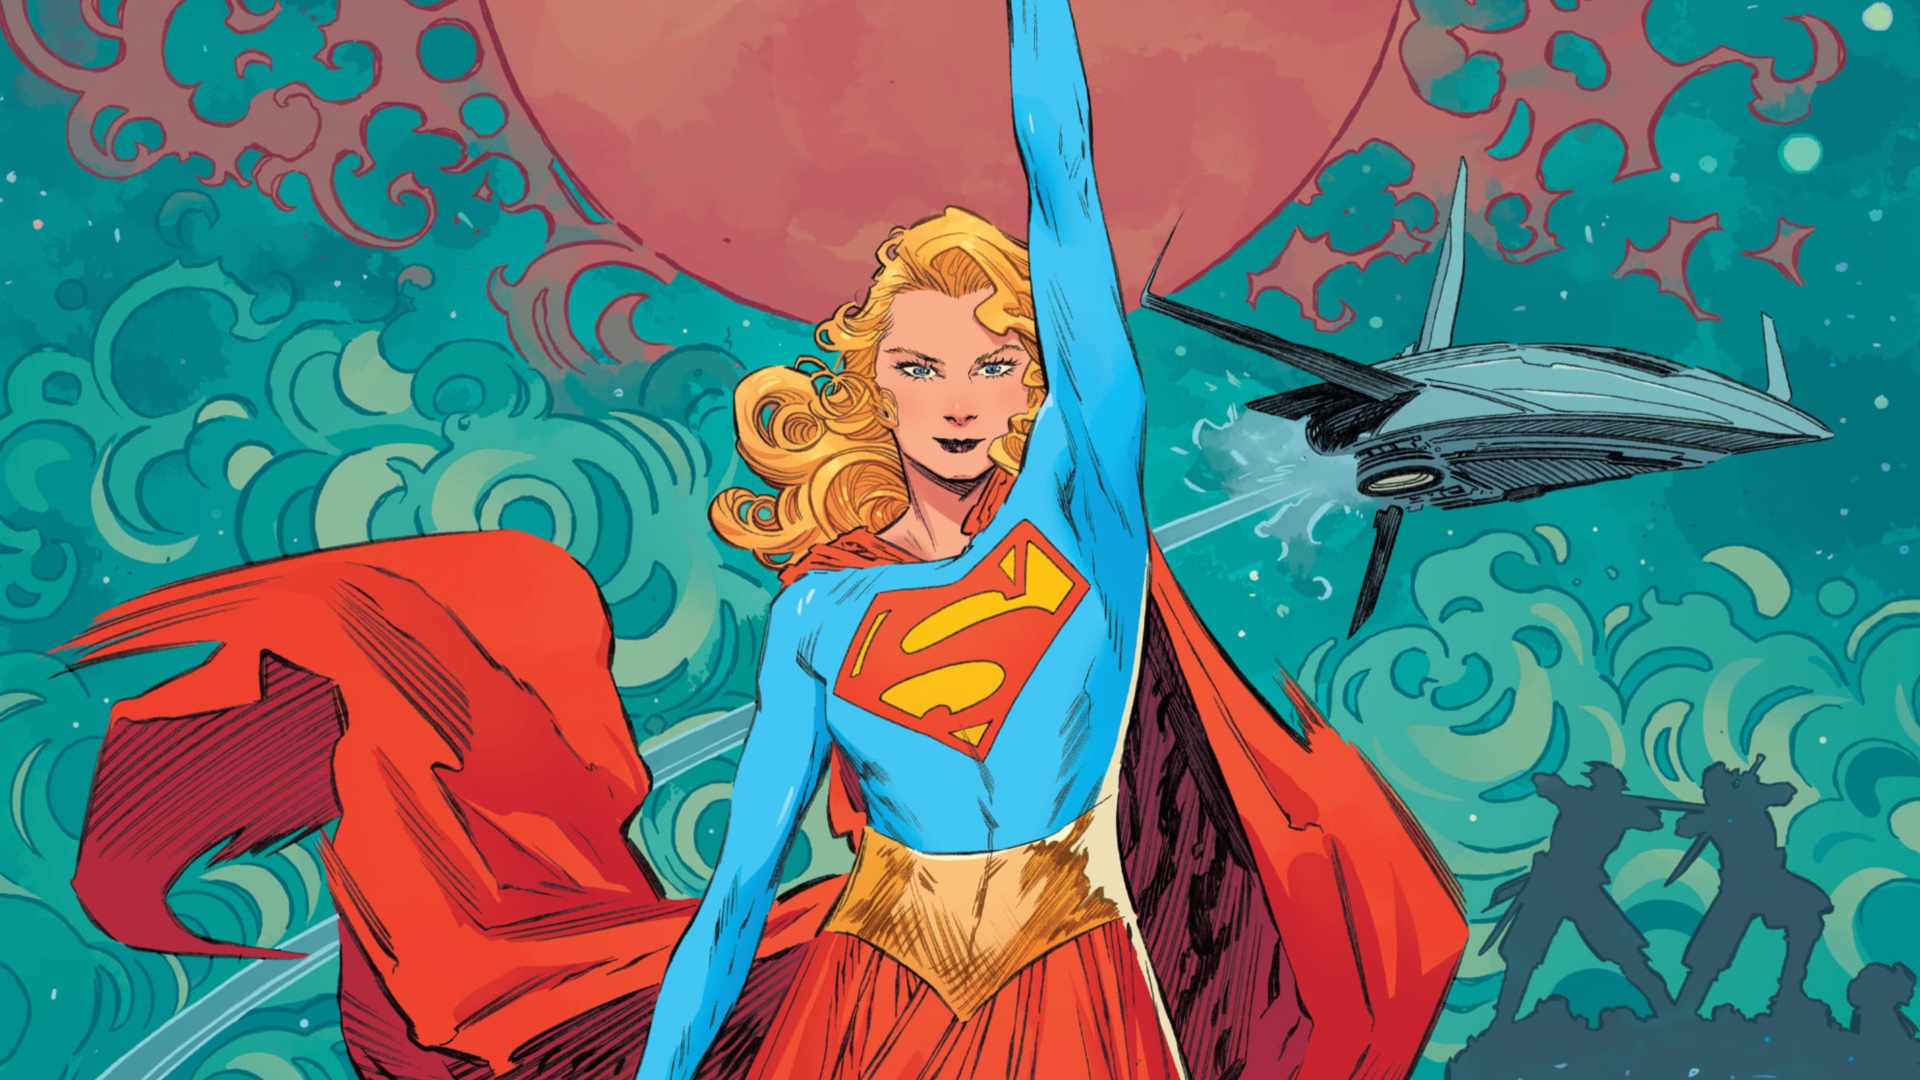 Supergirl: The Woman of Tomorrow art